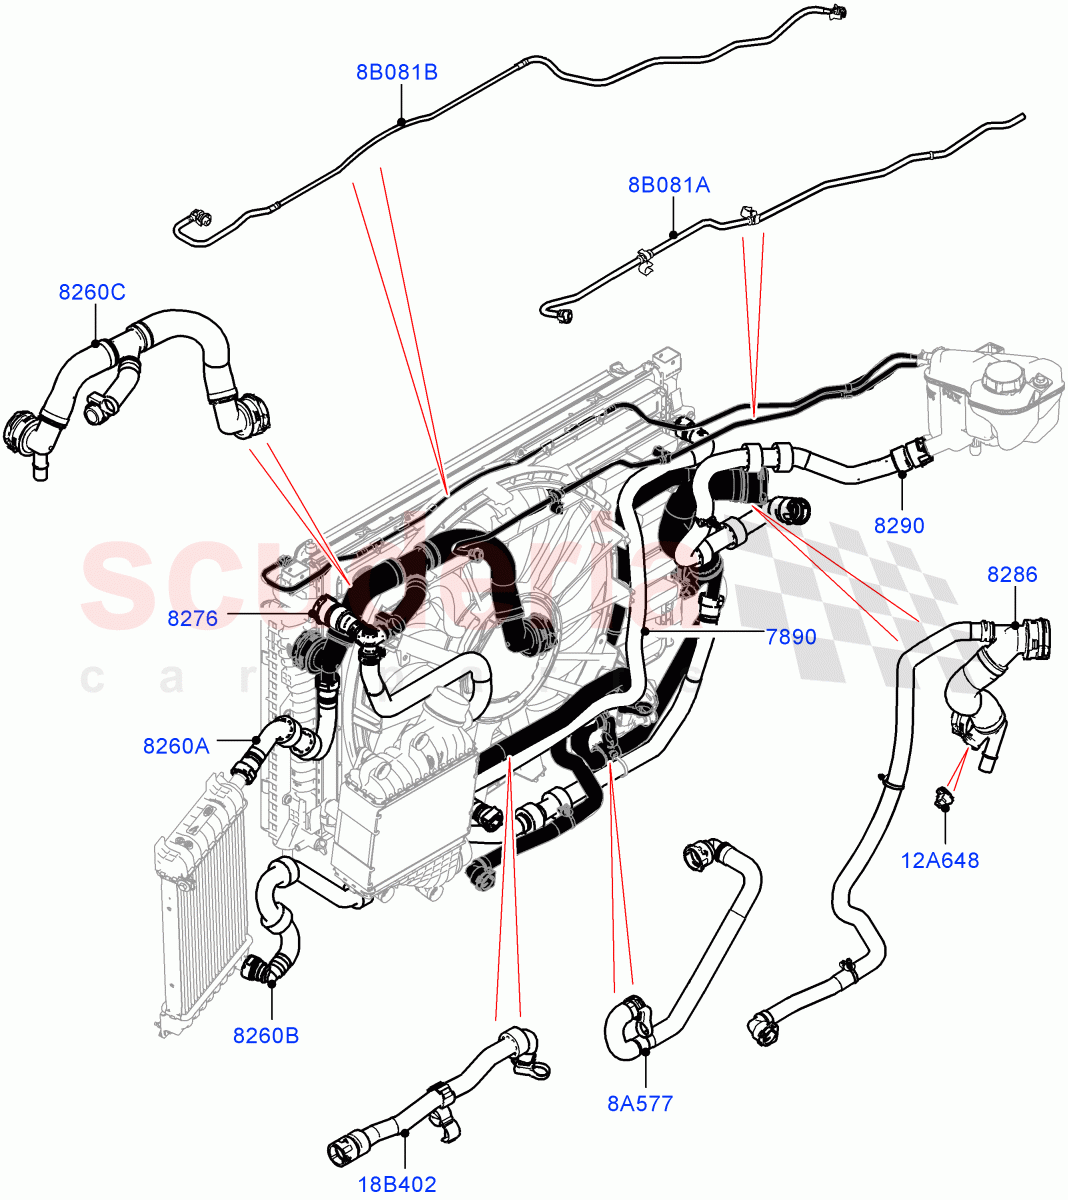 Cooling System Pipes And Hoses(2.0L I4 Mid DOHC AJ200 Petrol,With Extra Engine Cooling System,Less Active Tranmission Warming,2.0L I4 Mid AJ200 Petrol E100)((V)FROMJH000001) of Land Rover Land Rover Range Rover Evoque (2012-2018) [2.0 Turbo Petrol AJ200P]